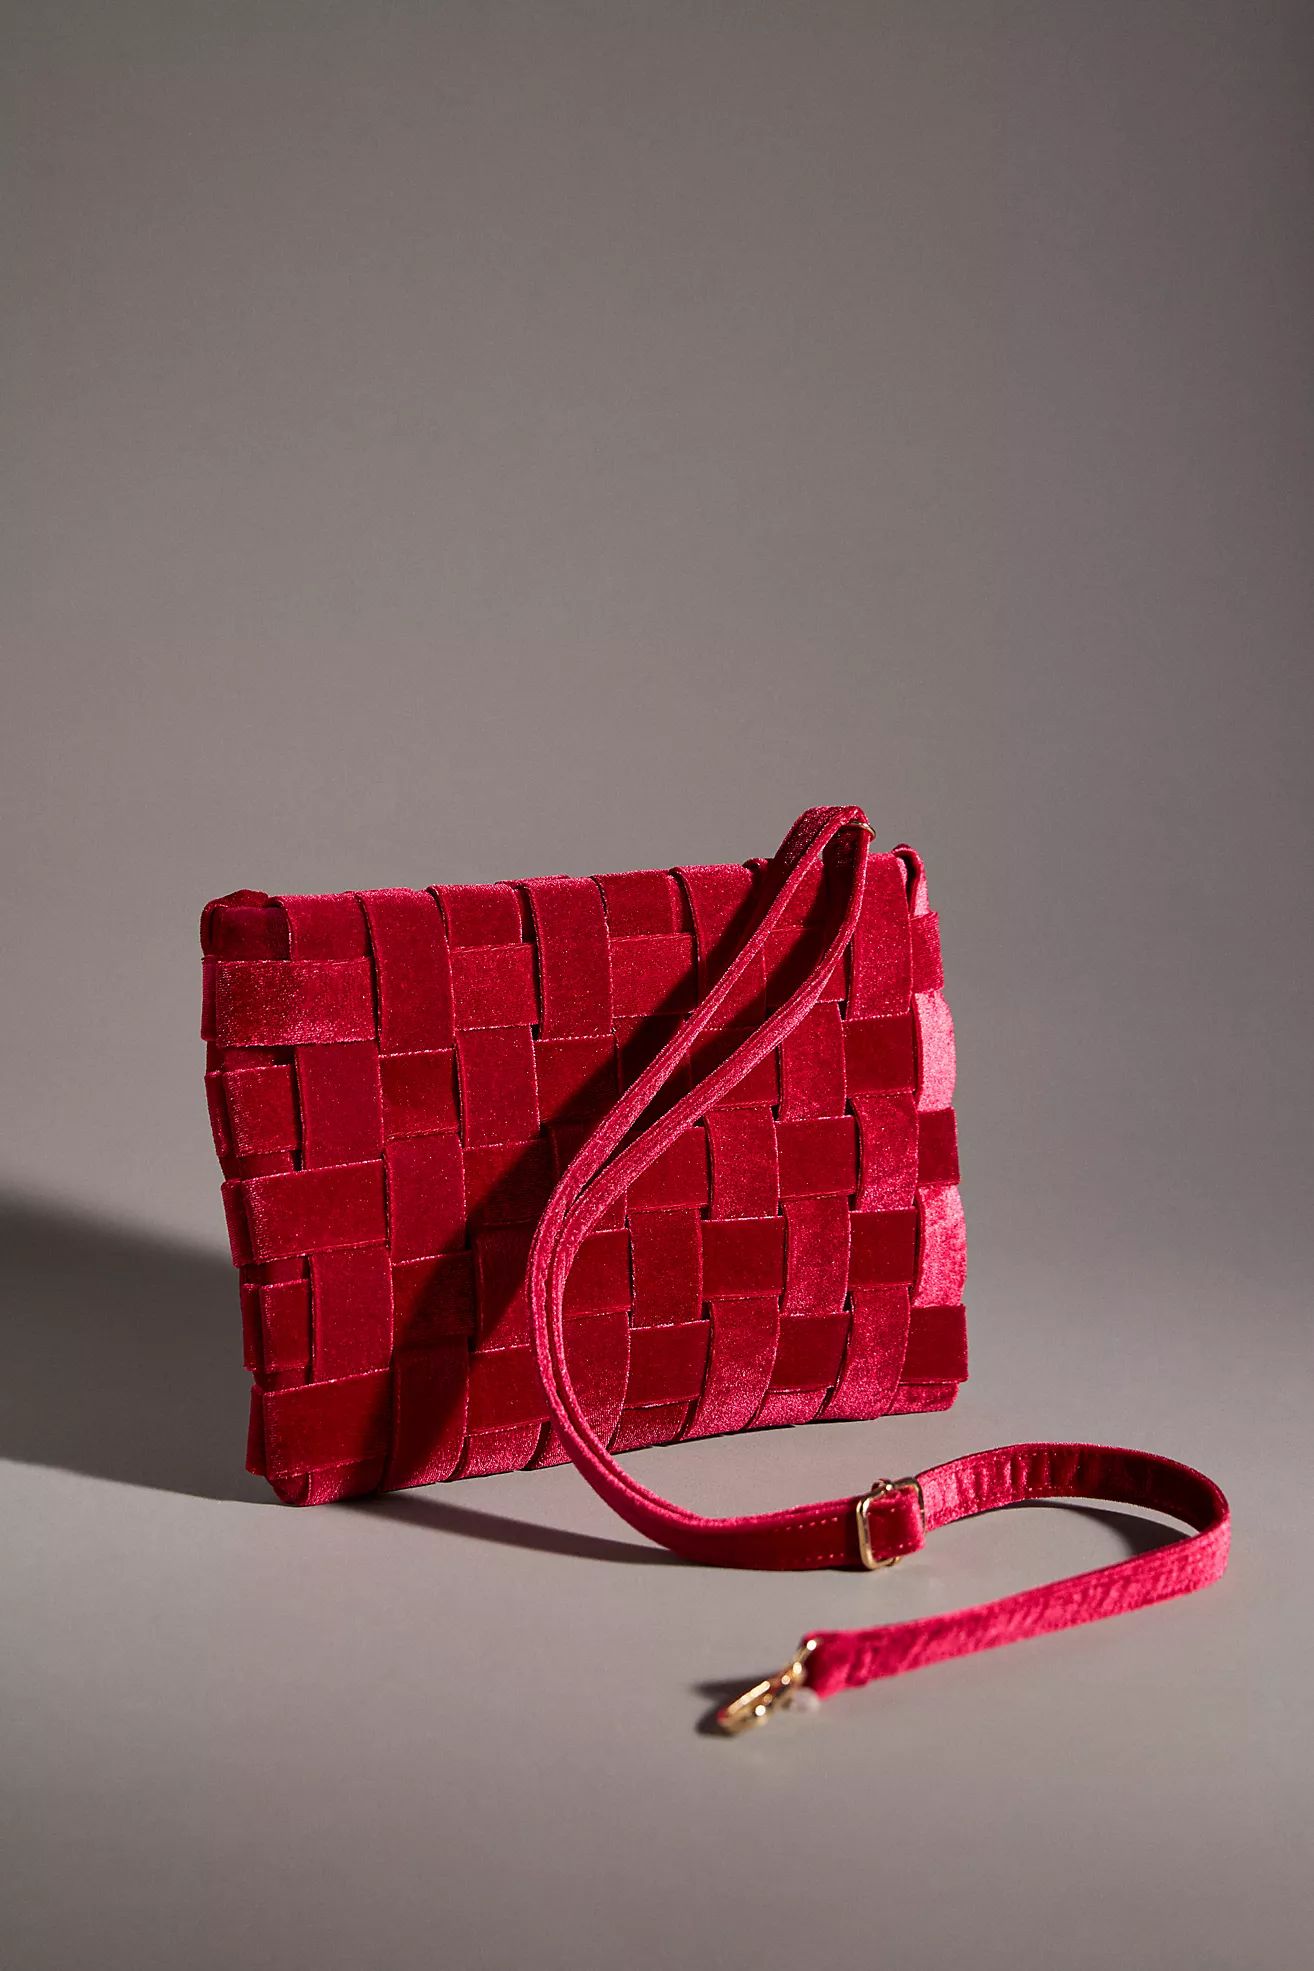 Lindy Woven Clutch: Velvet Edition | Anthropologie (US)